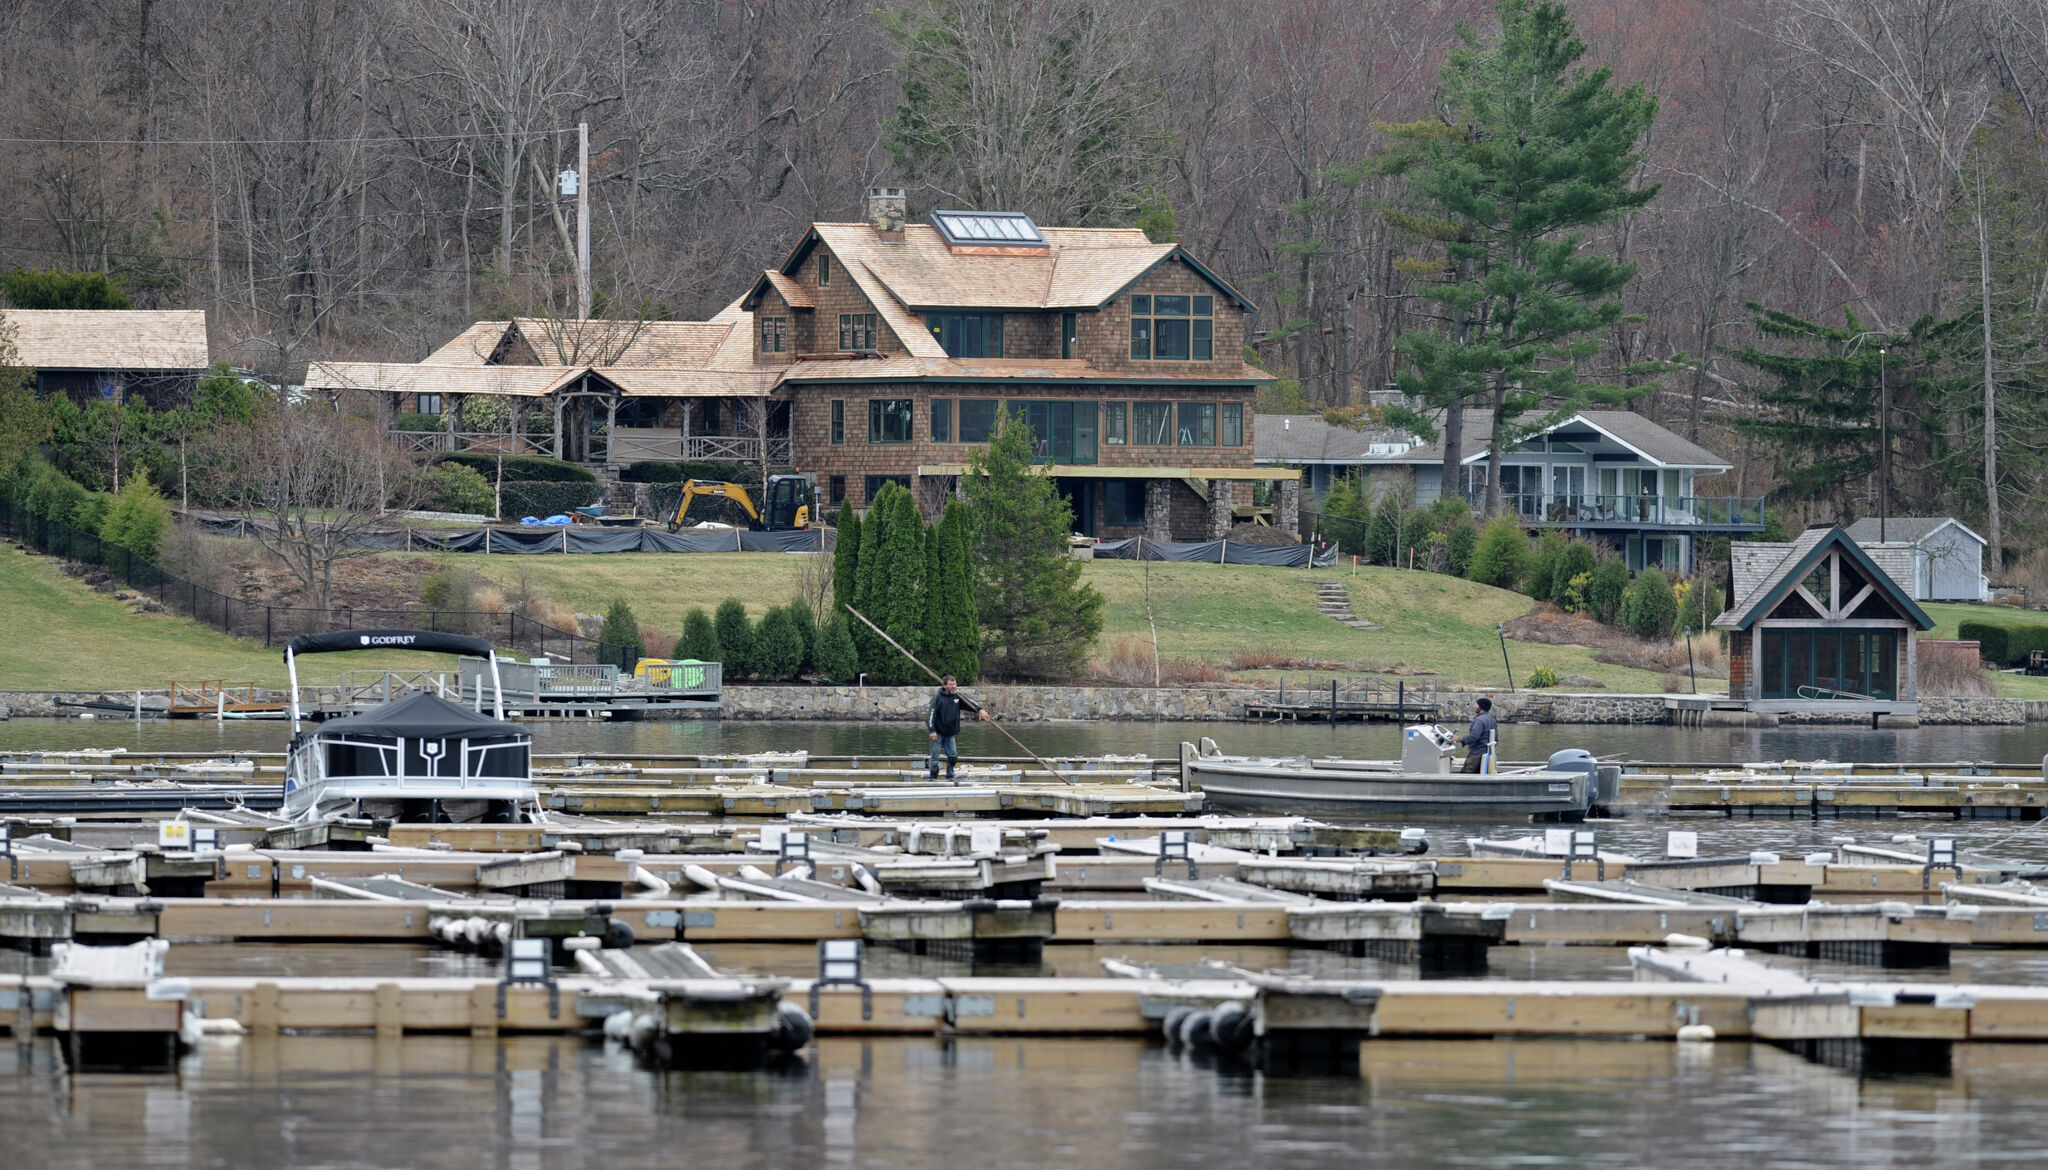 Drawdown planned for lakes Lillinonah, Candlewood and Zoar